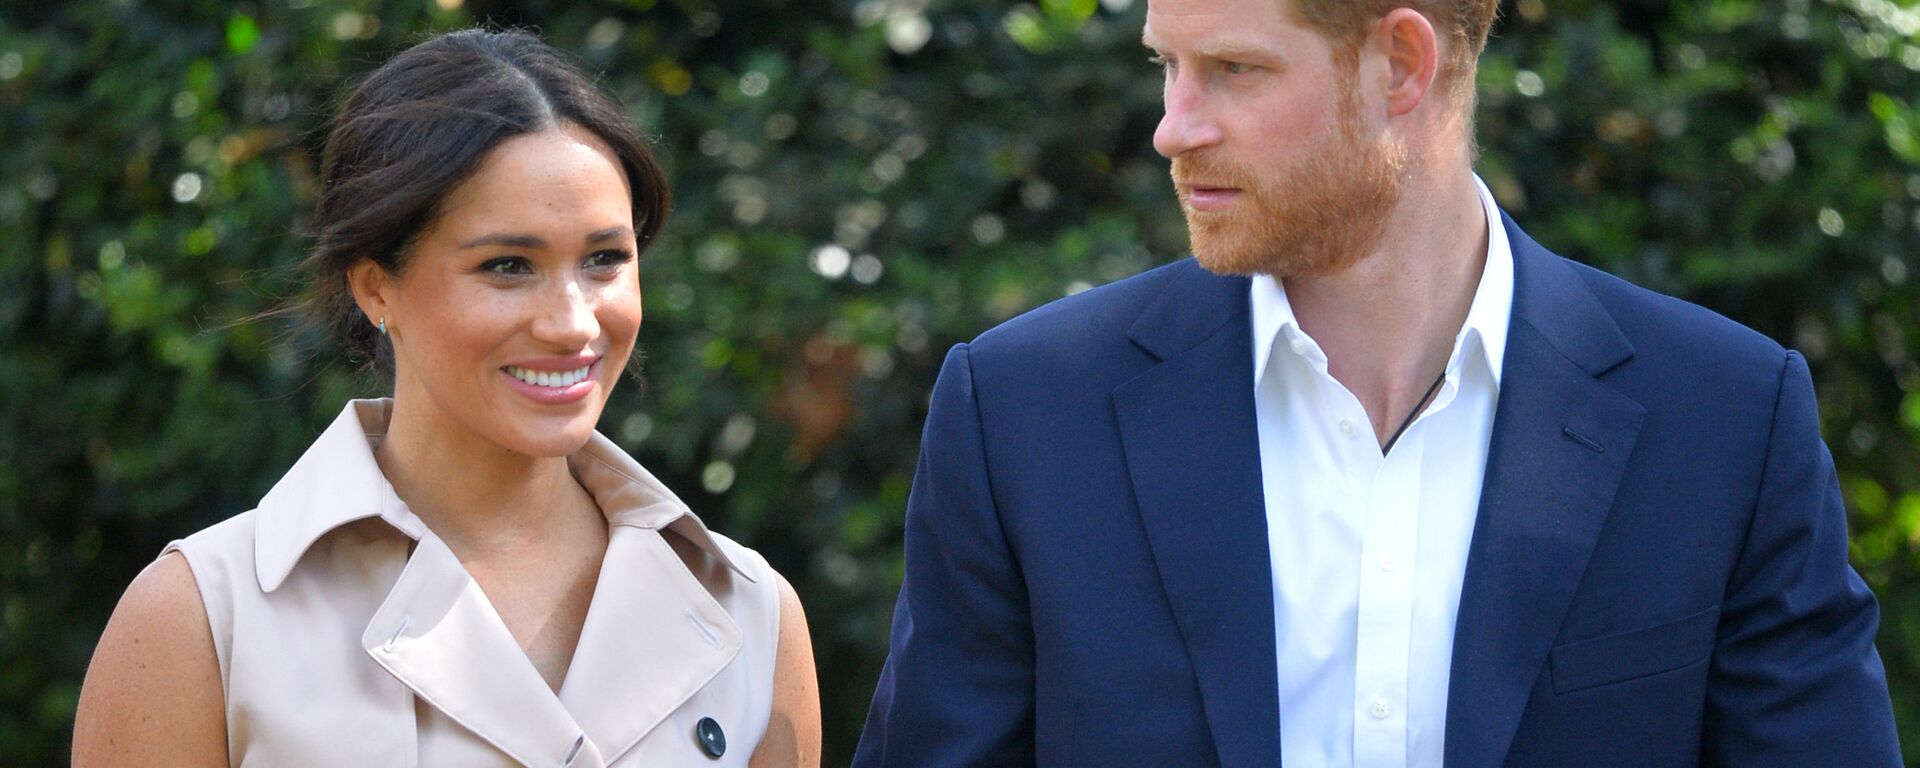 In this Oct. 2, 2019, file photo, Britain's Harry and Meghan, Duchess of Sussex arrive at the Creative Industries and Business Reception at the British High Commissioner's residence in Johannesburg, where they will meet with representatives of the British and South African business communities, including local youth entrepreneurs - Sputnik International, 1920, 23.12.2021